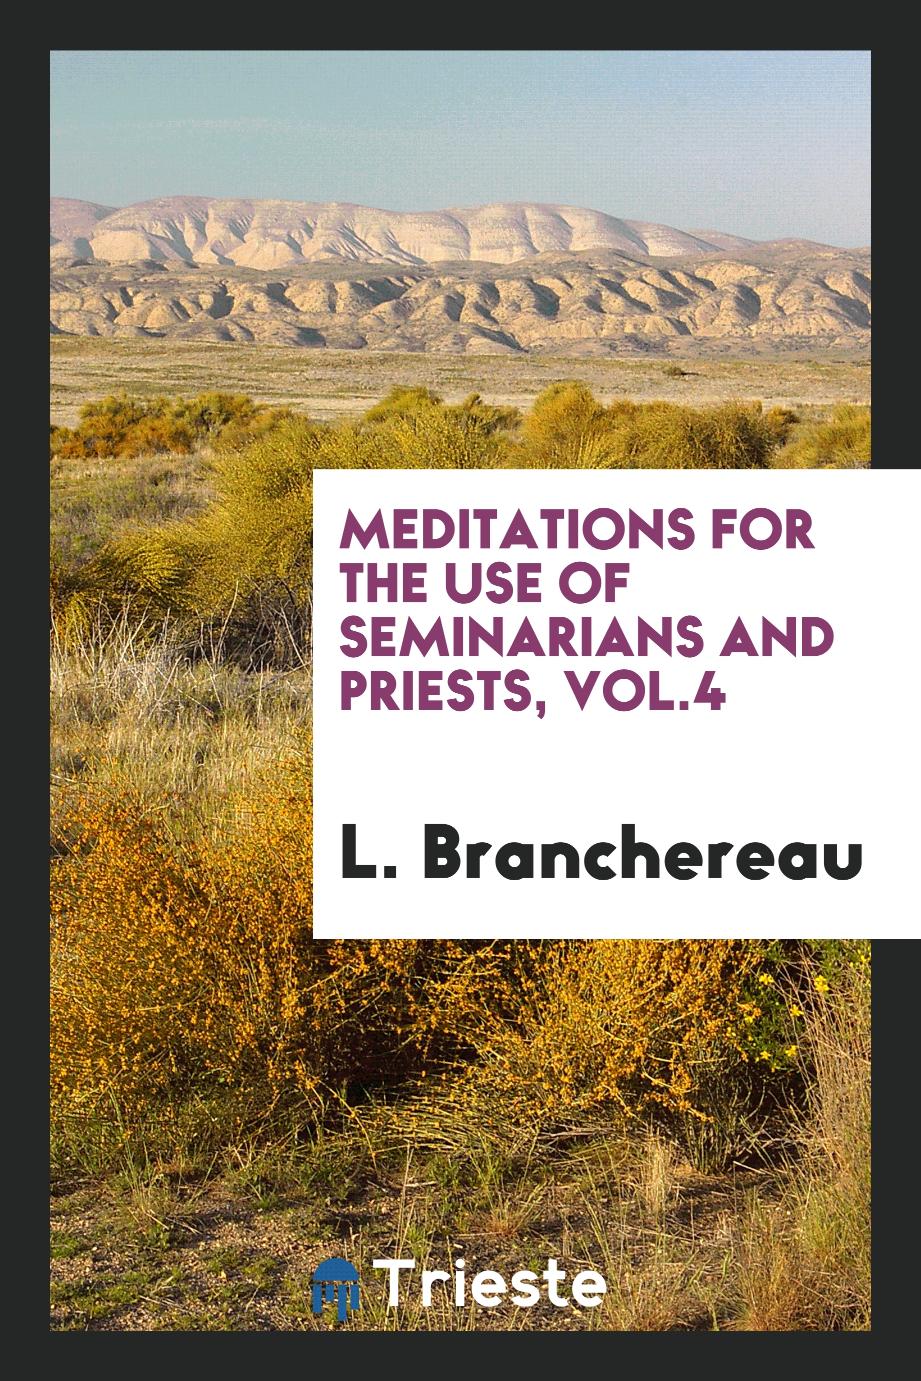 Meditations for the use of seminarians and priests, Vol.4